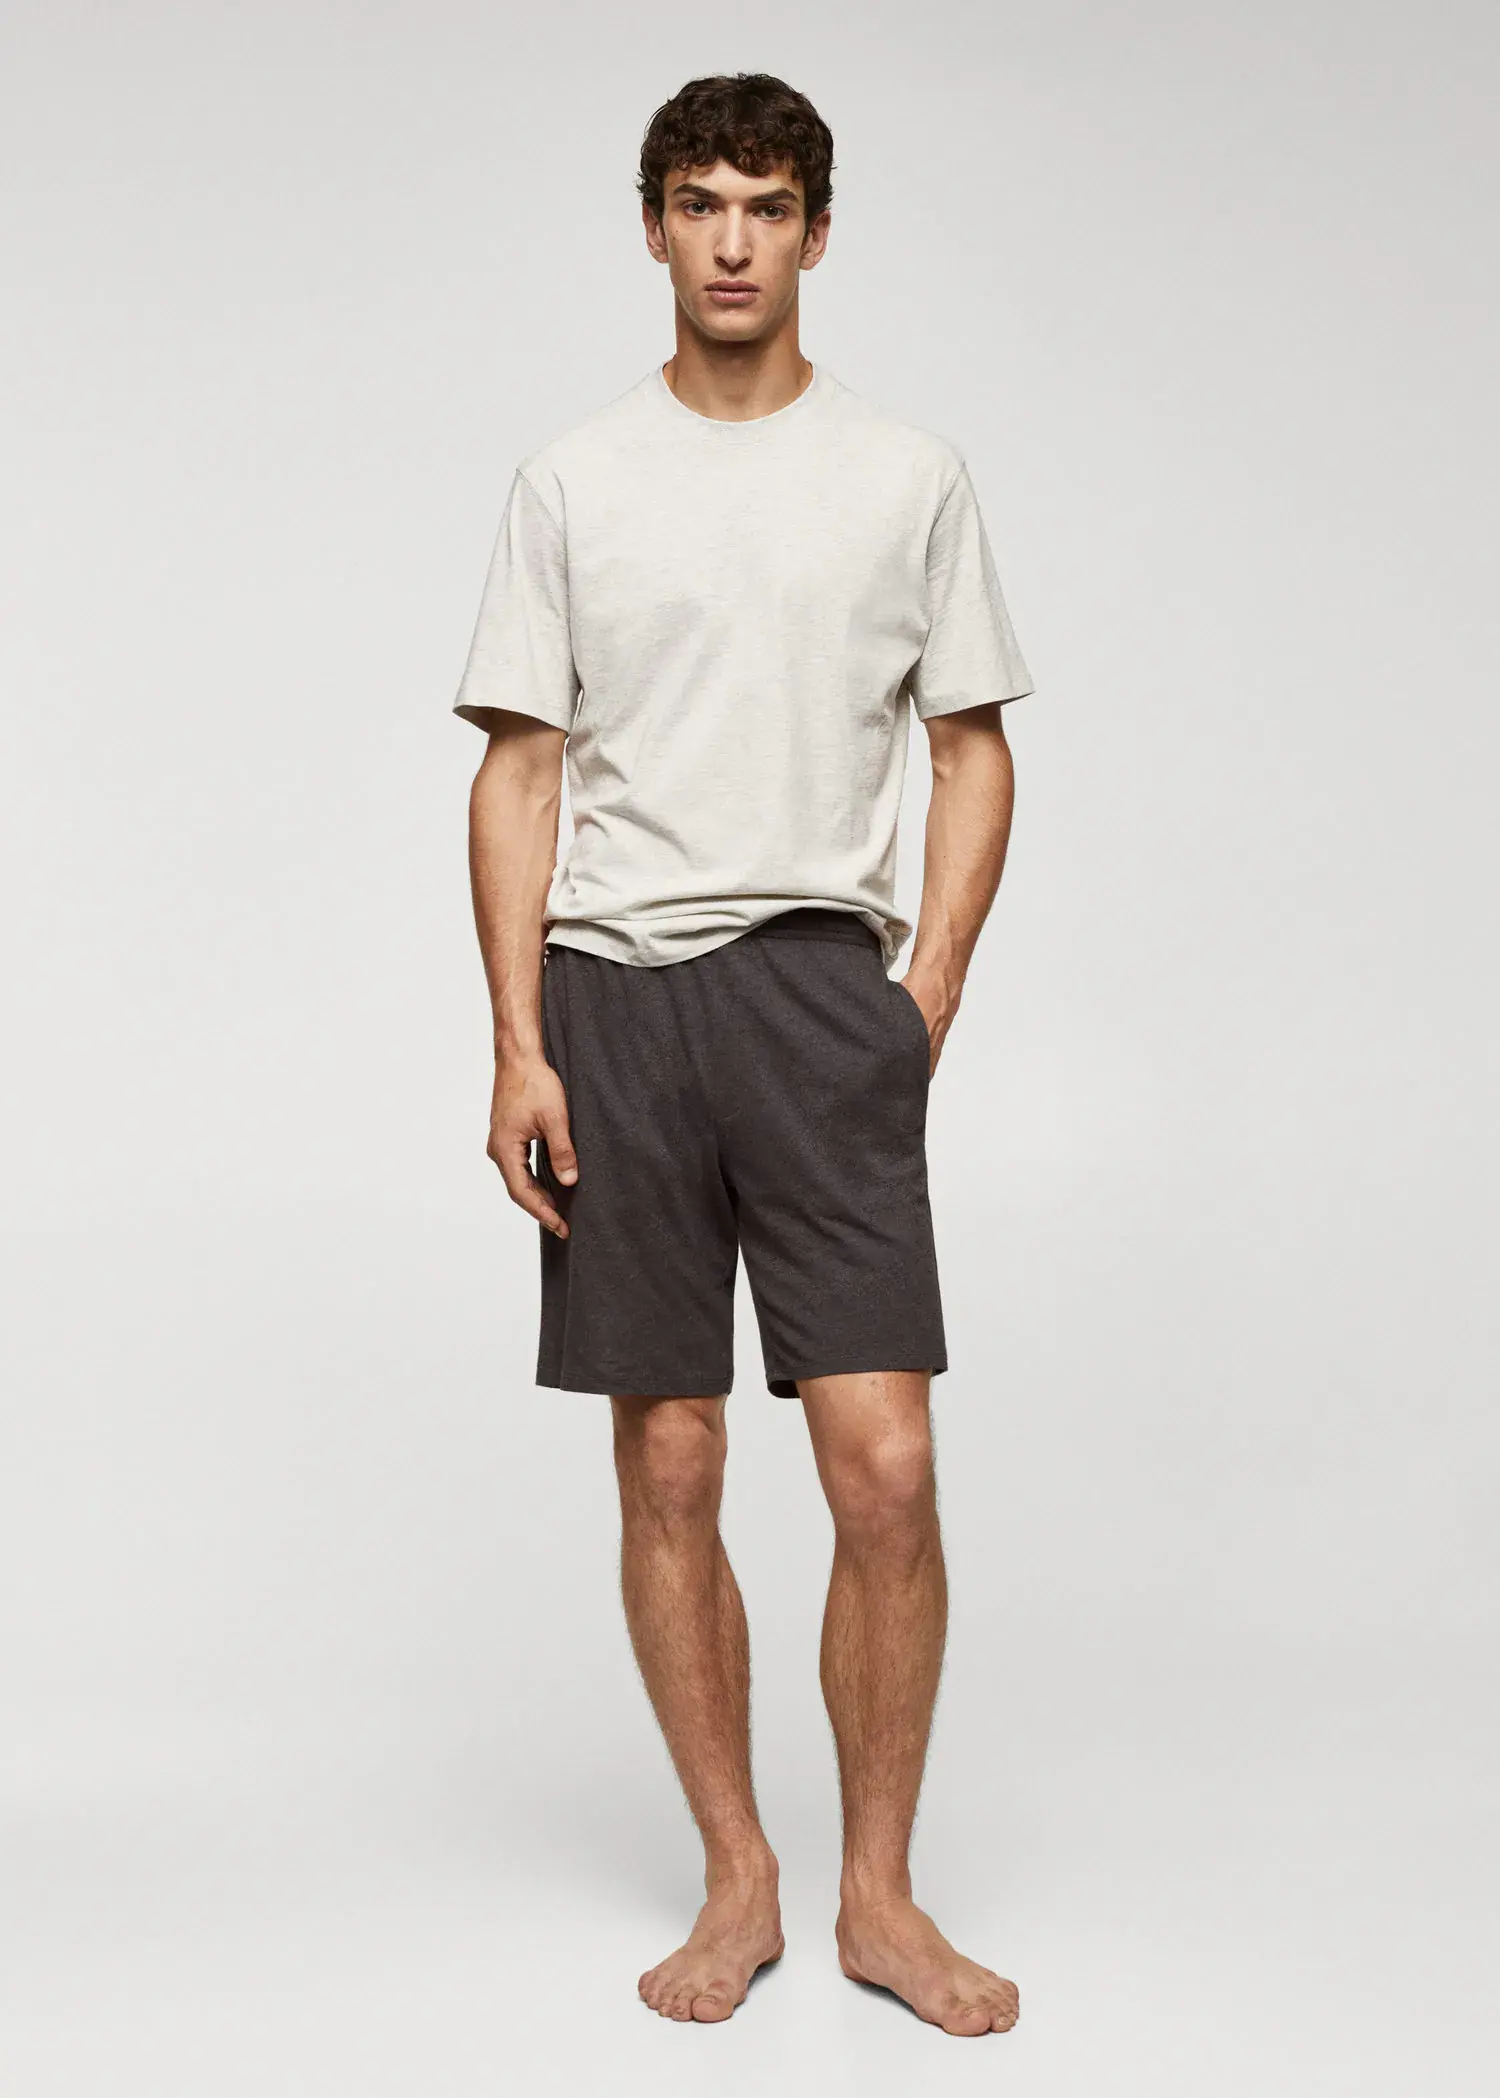 Mango Cotton pajama shorts pack. a young man in a white t-shirt and black shorts. 